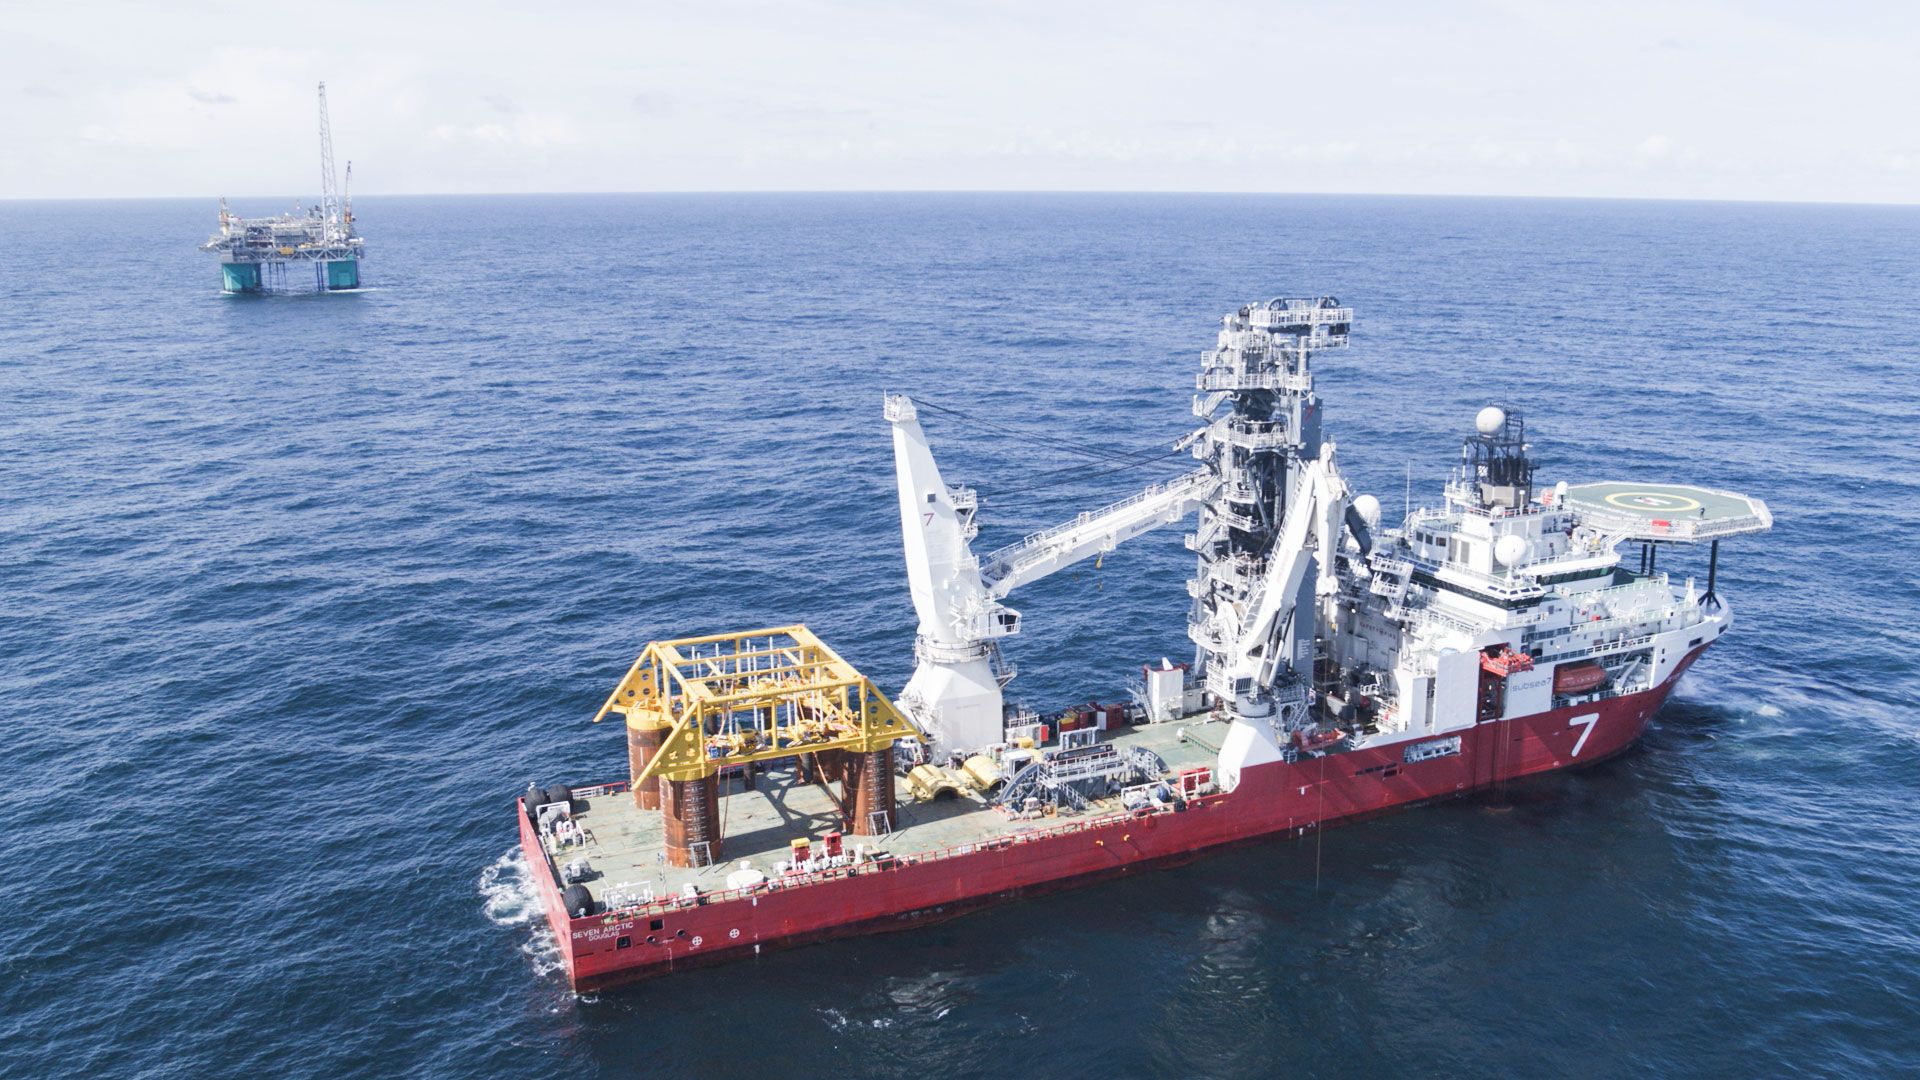 Wintershall Dea support vessel subsea template